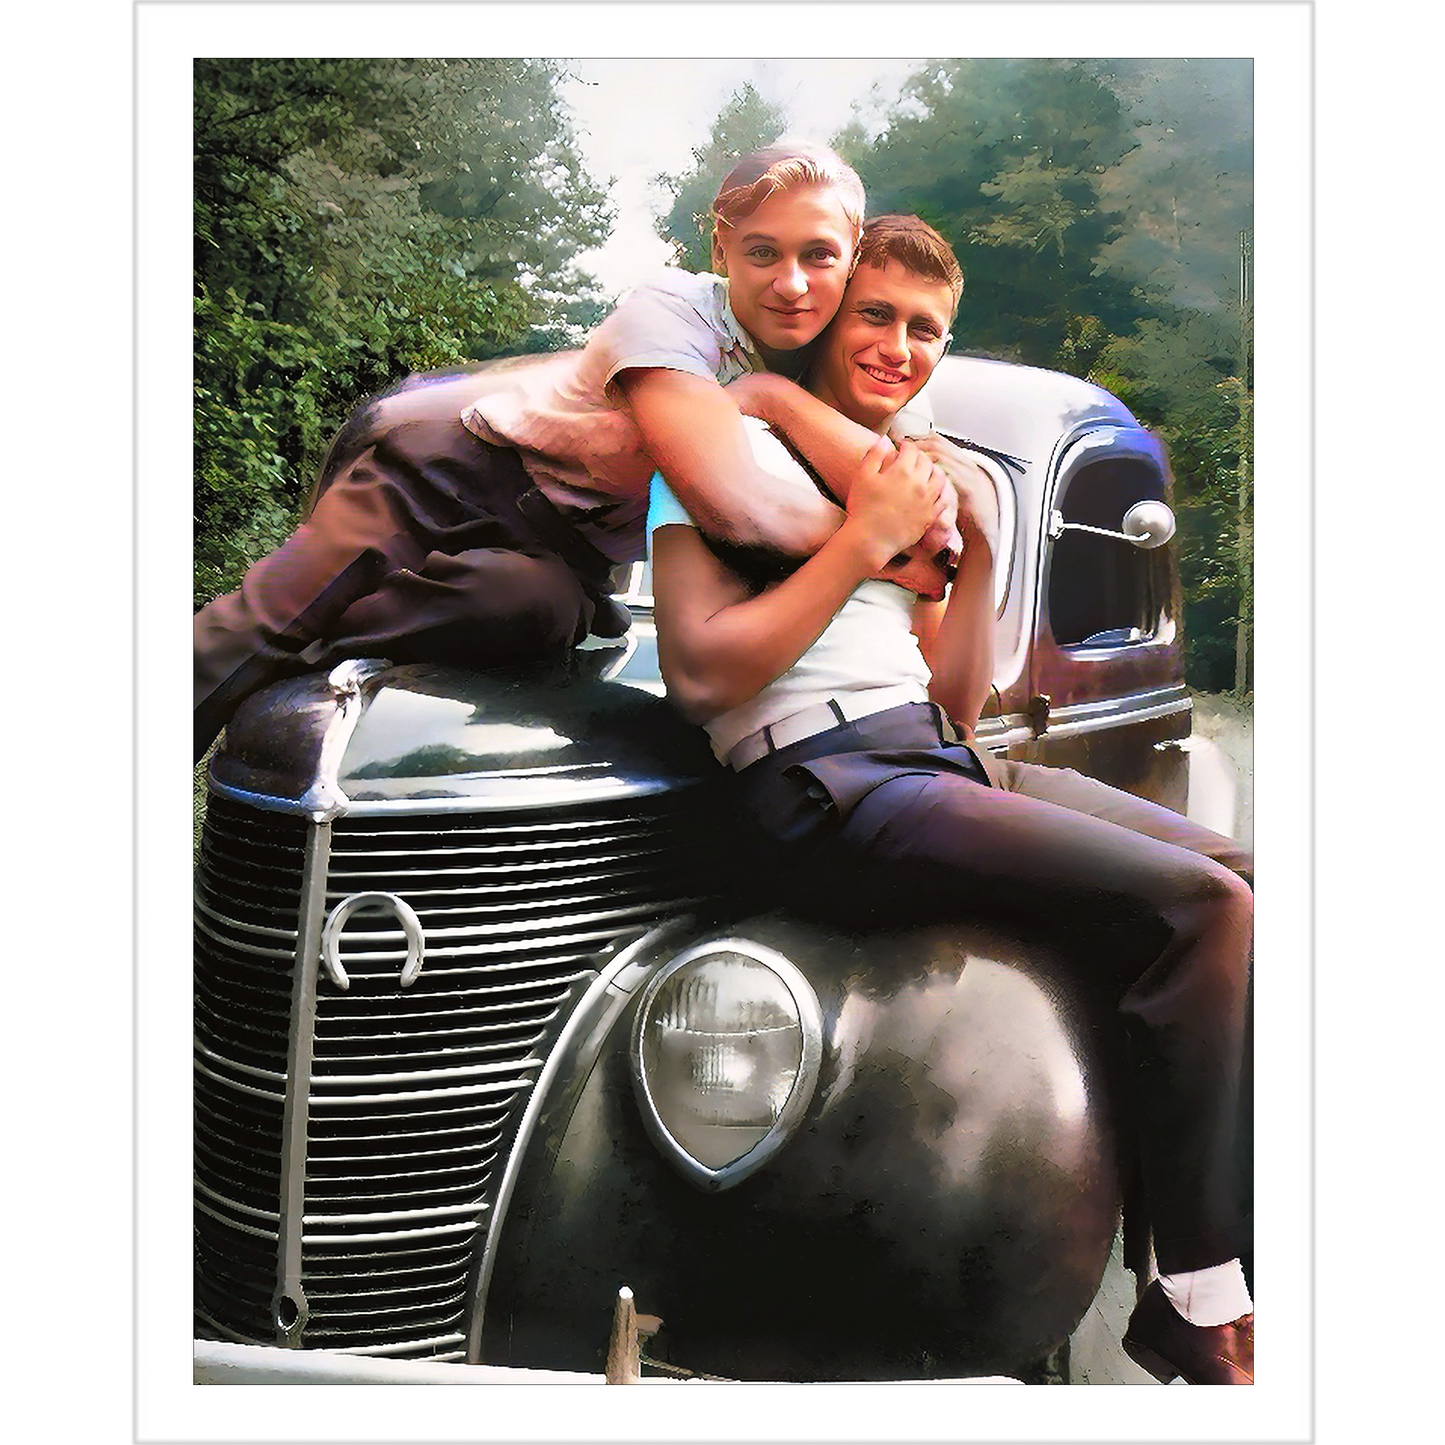 paire 045 | Giclee Artist Print Gay Vintage Affectionate Men Chevy Embrace Love Queer LGBTQ Boyfriends